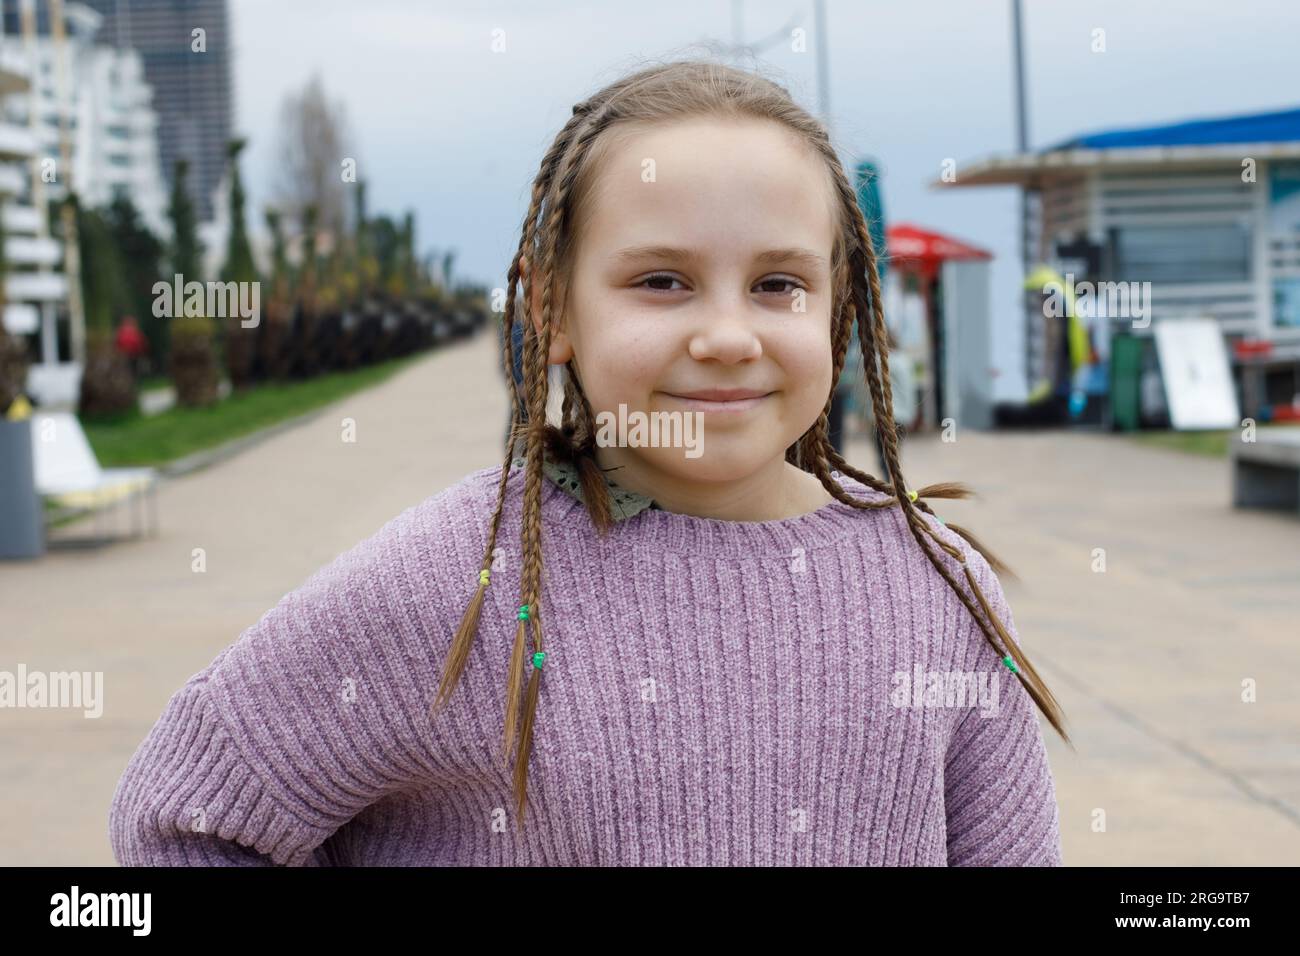 Cheerful kid girl with pigtails smiling, outdoor portrait Stock Photo